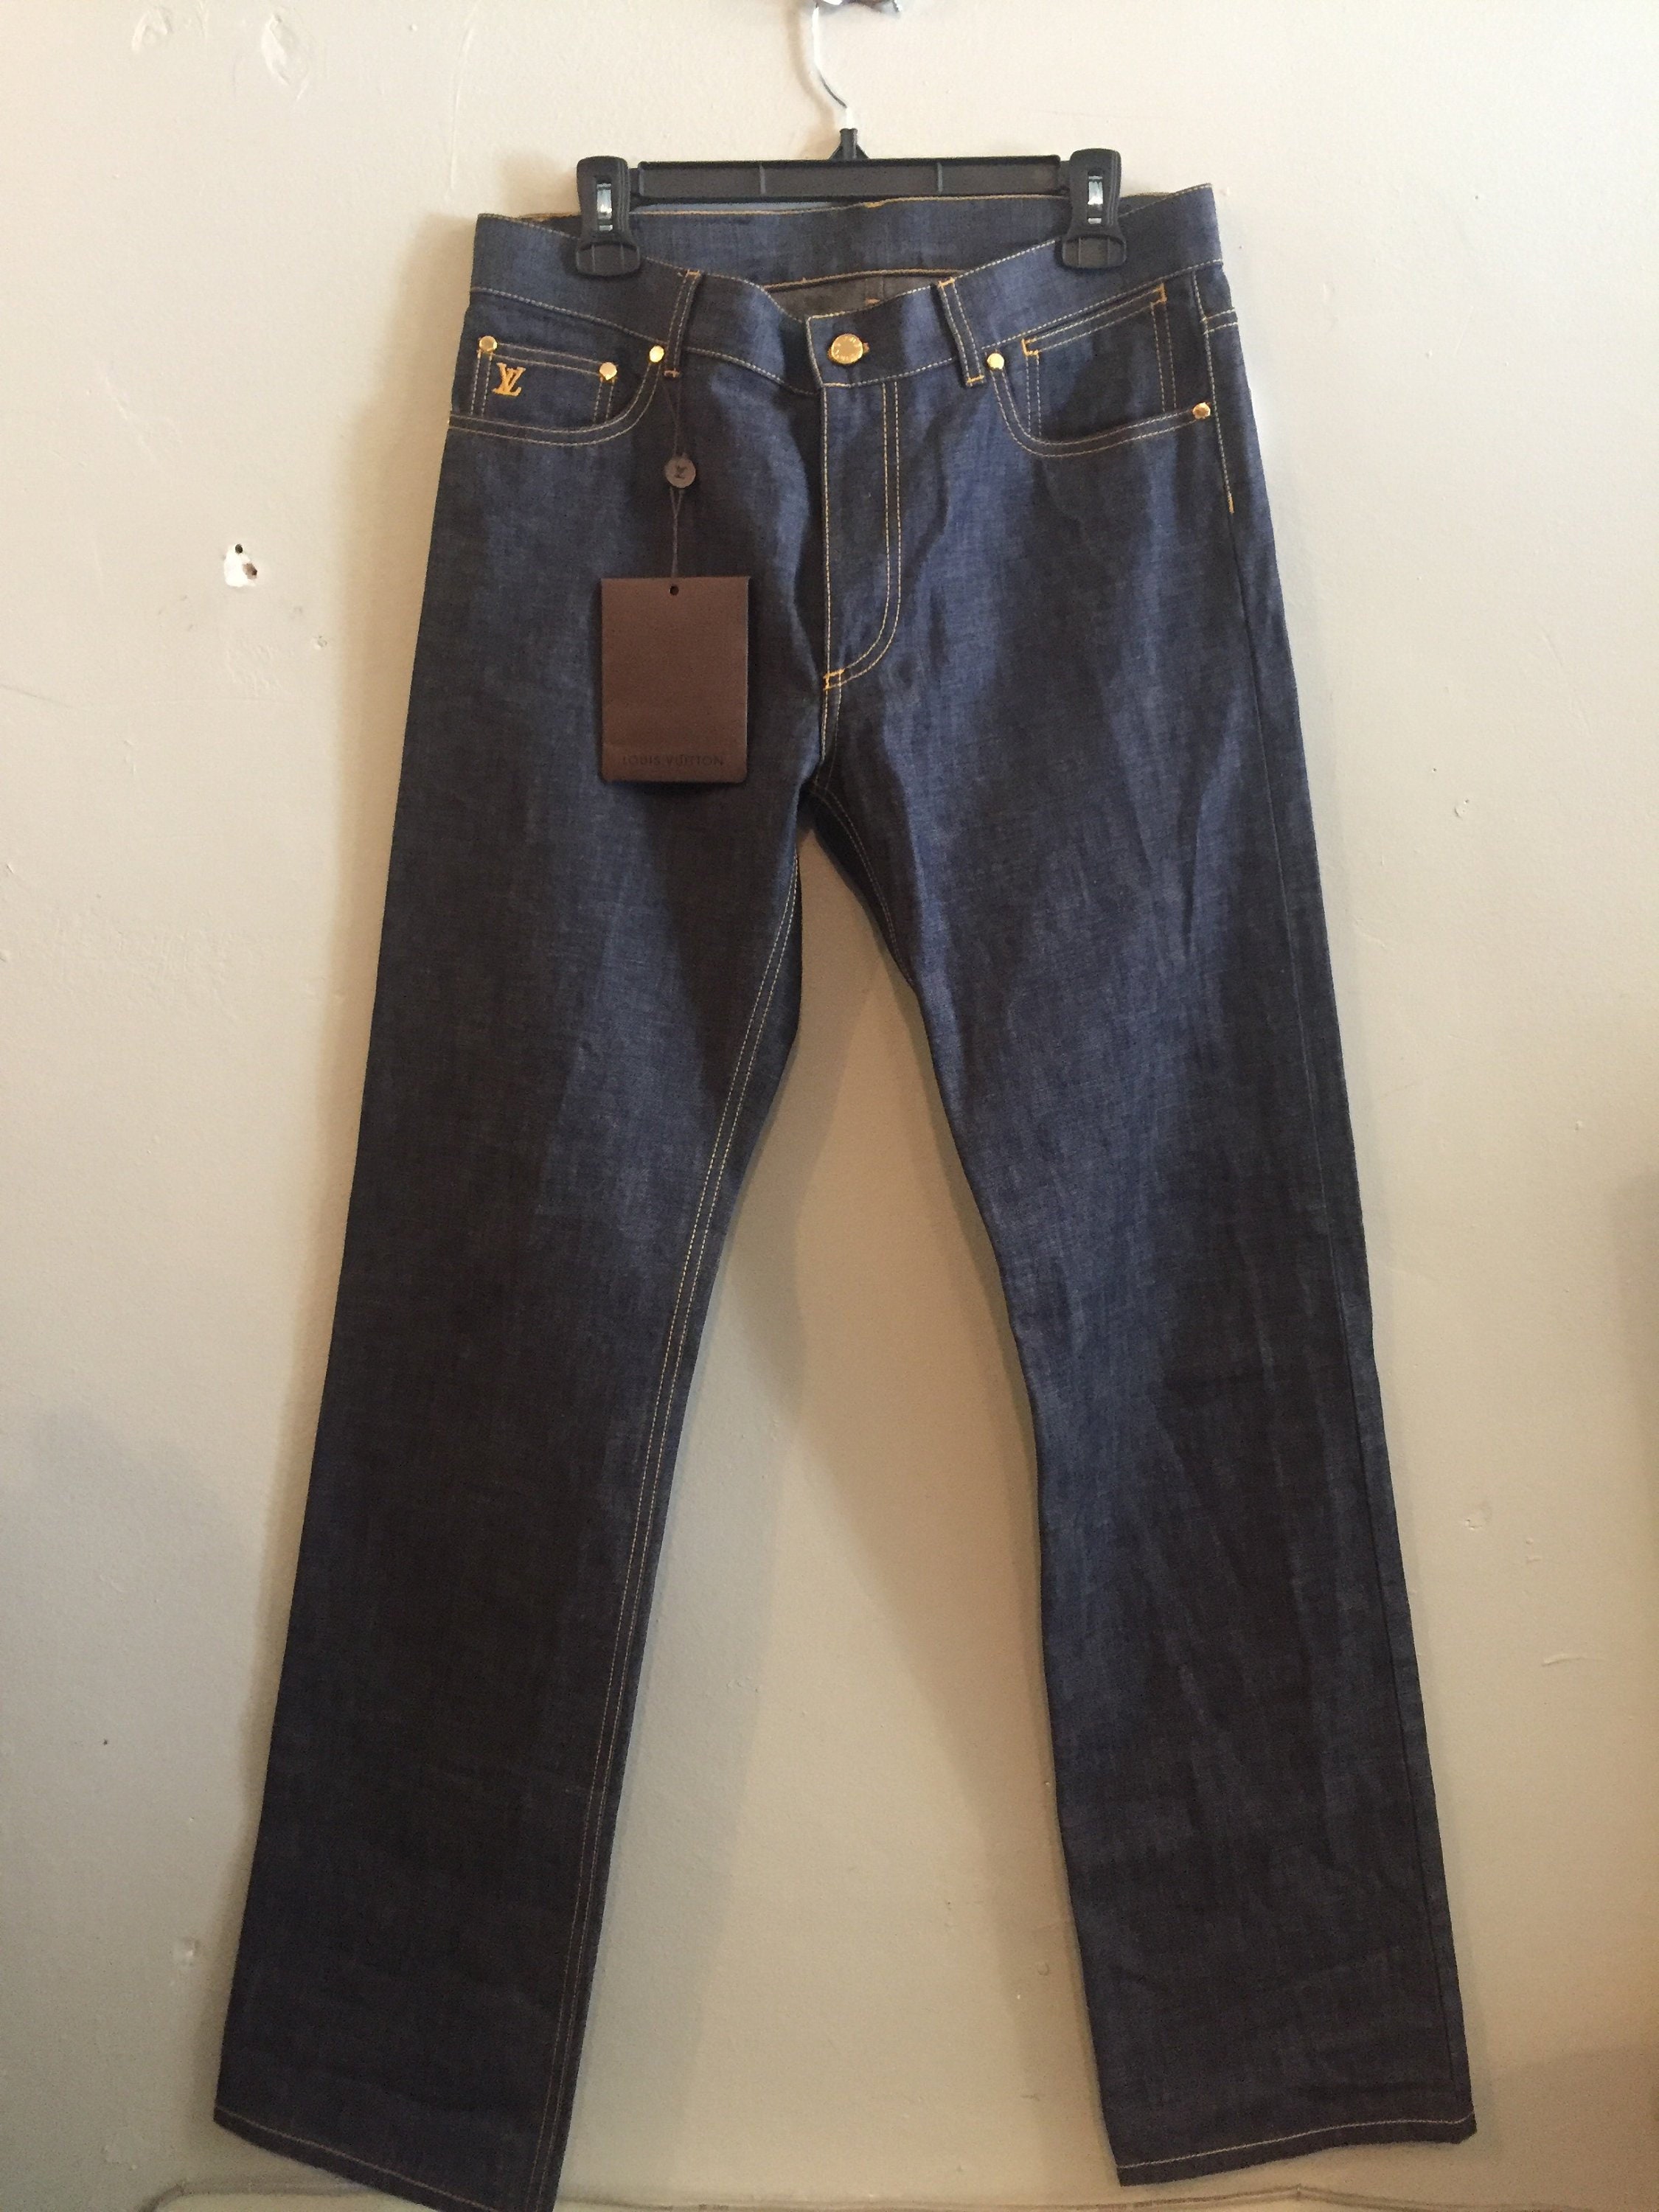 LOUIS VUITTON / Jeans / Authentic Denim / Made in France / 